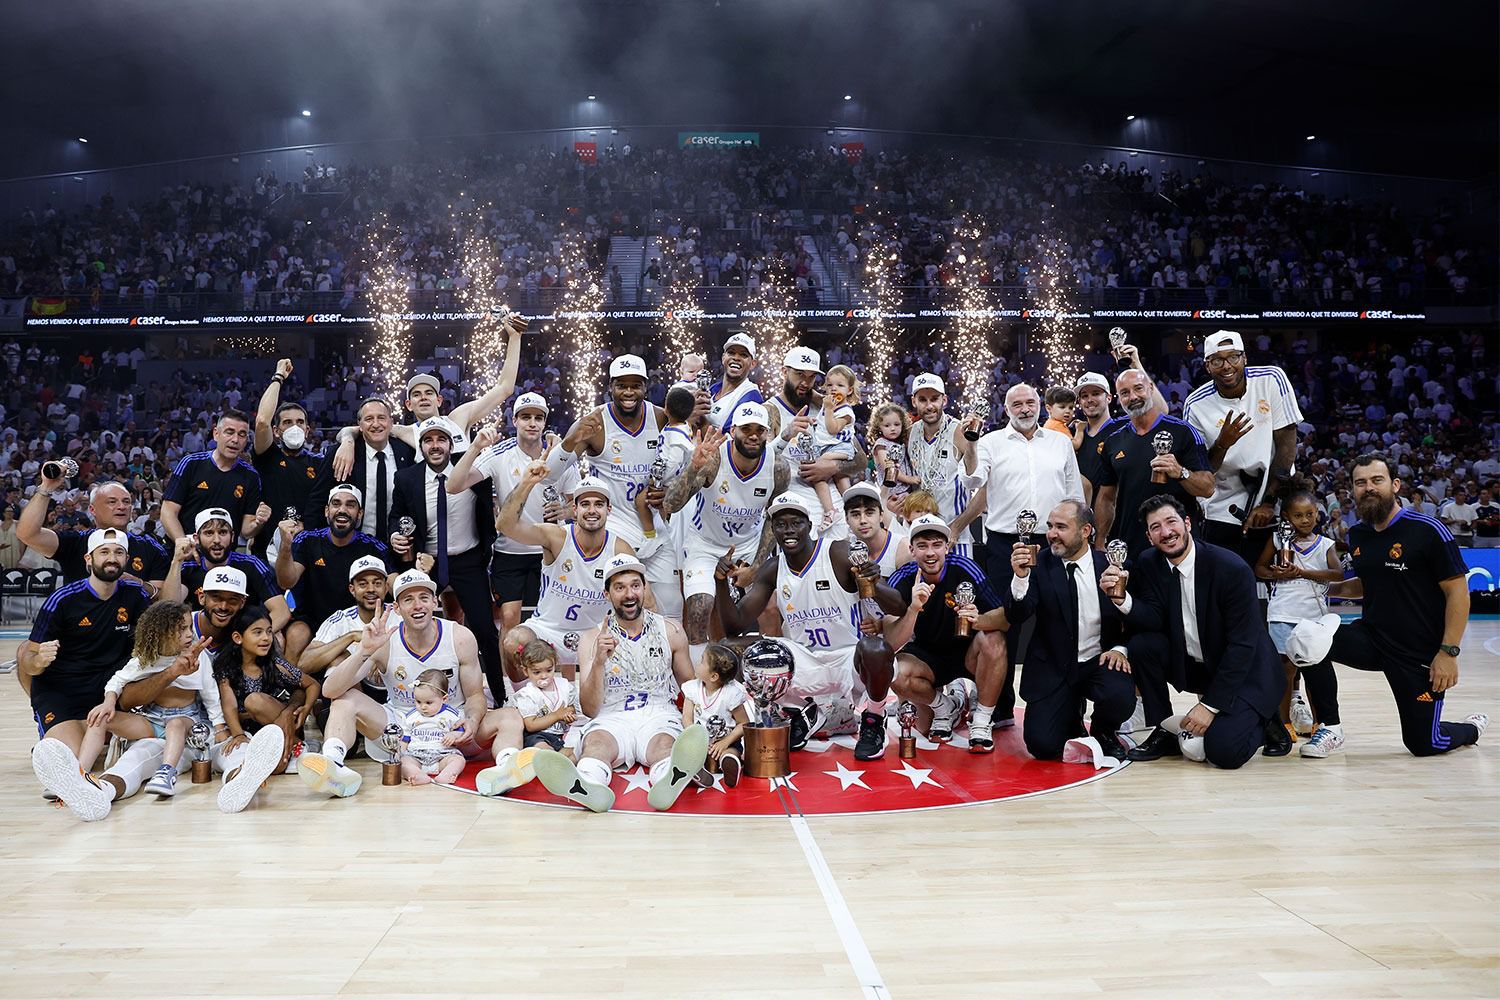 Real wins its 36th Spanish championship on a Finals series dominated by the Whites